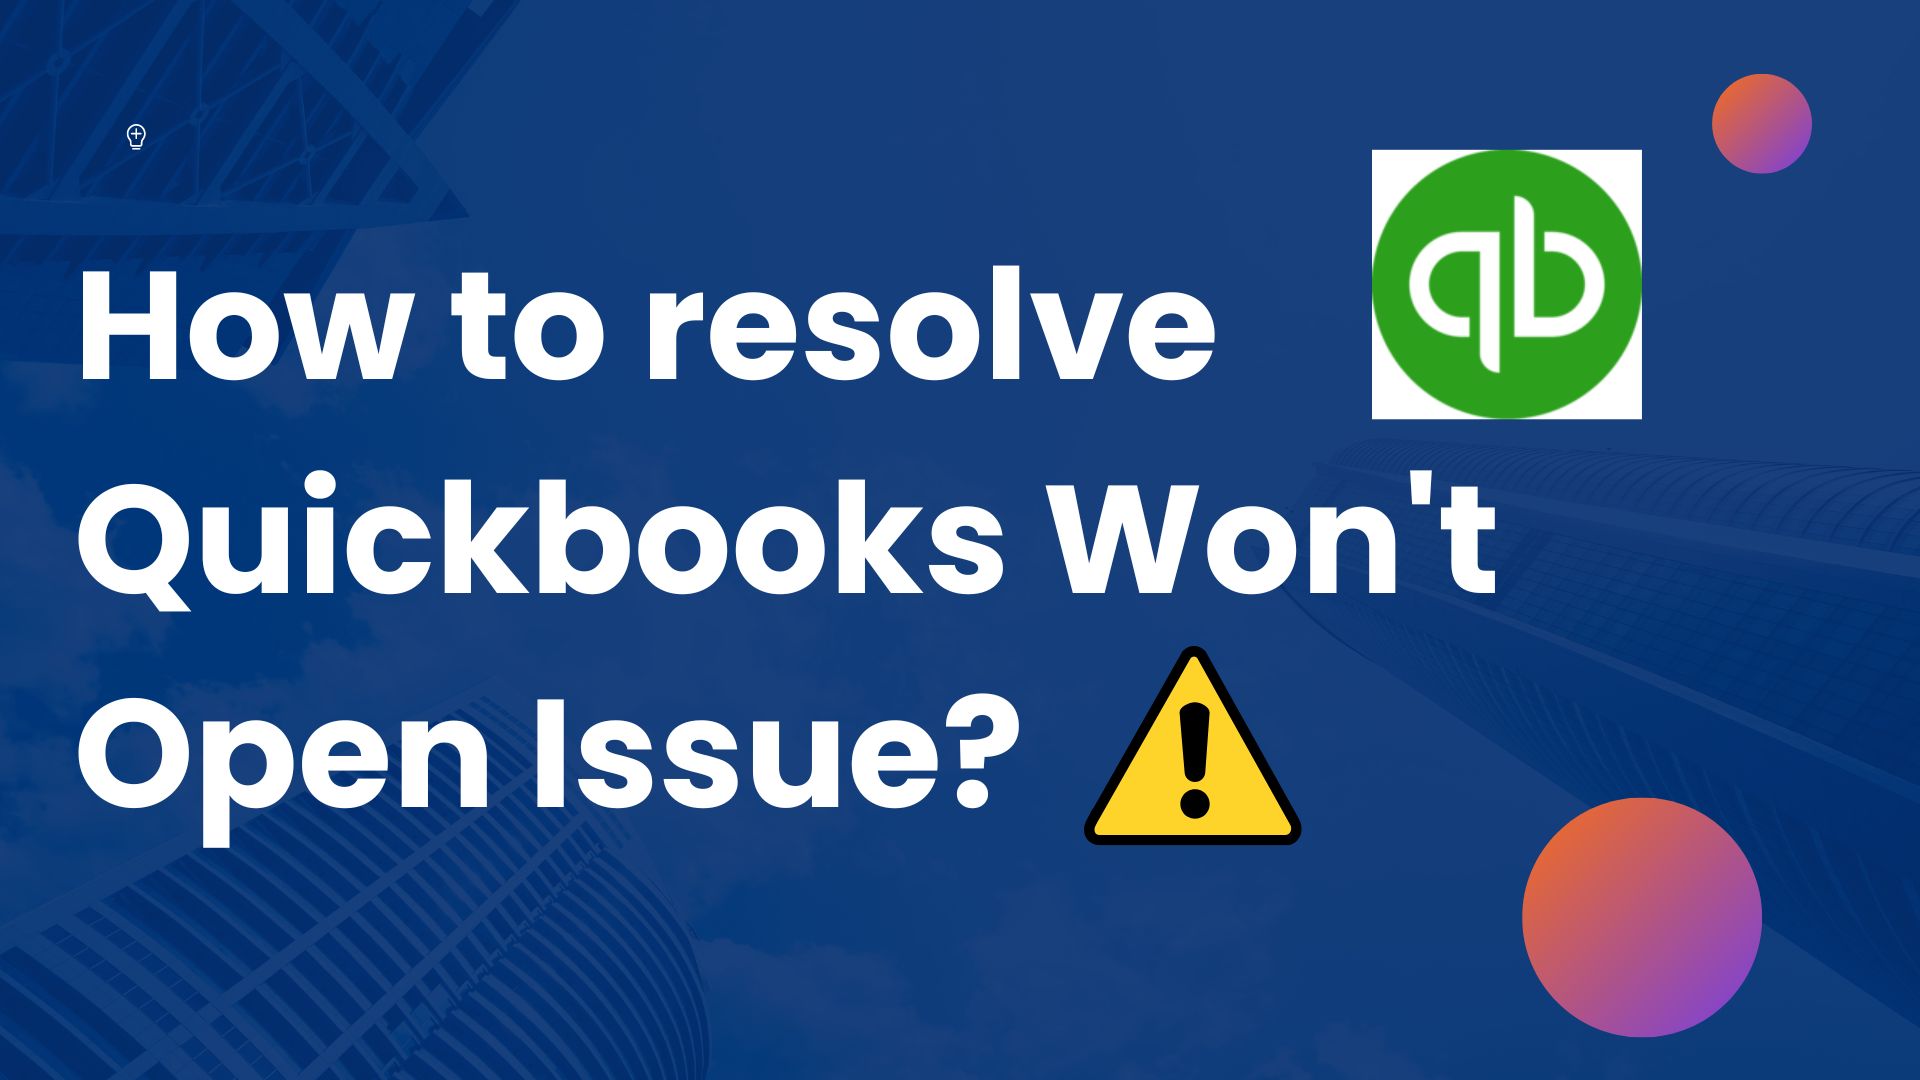 How to Resolve Quickbooks Won’t Open Issue?